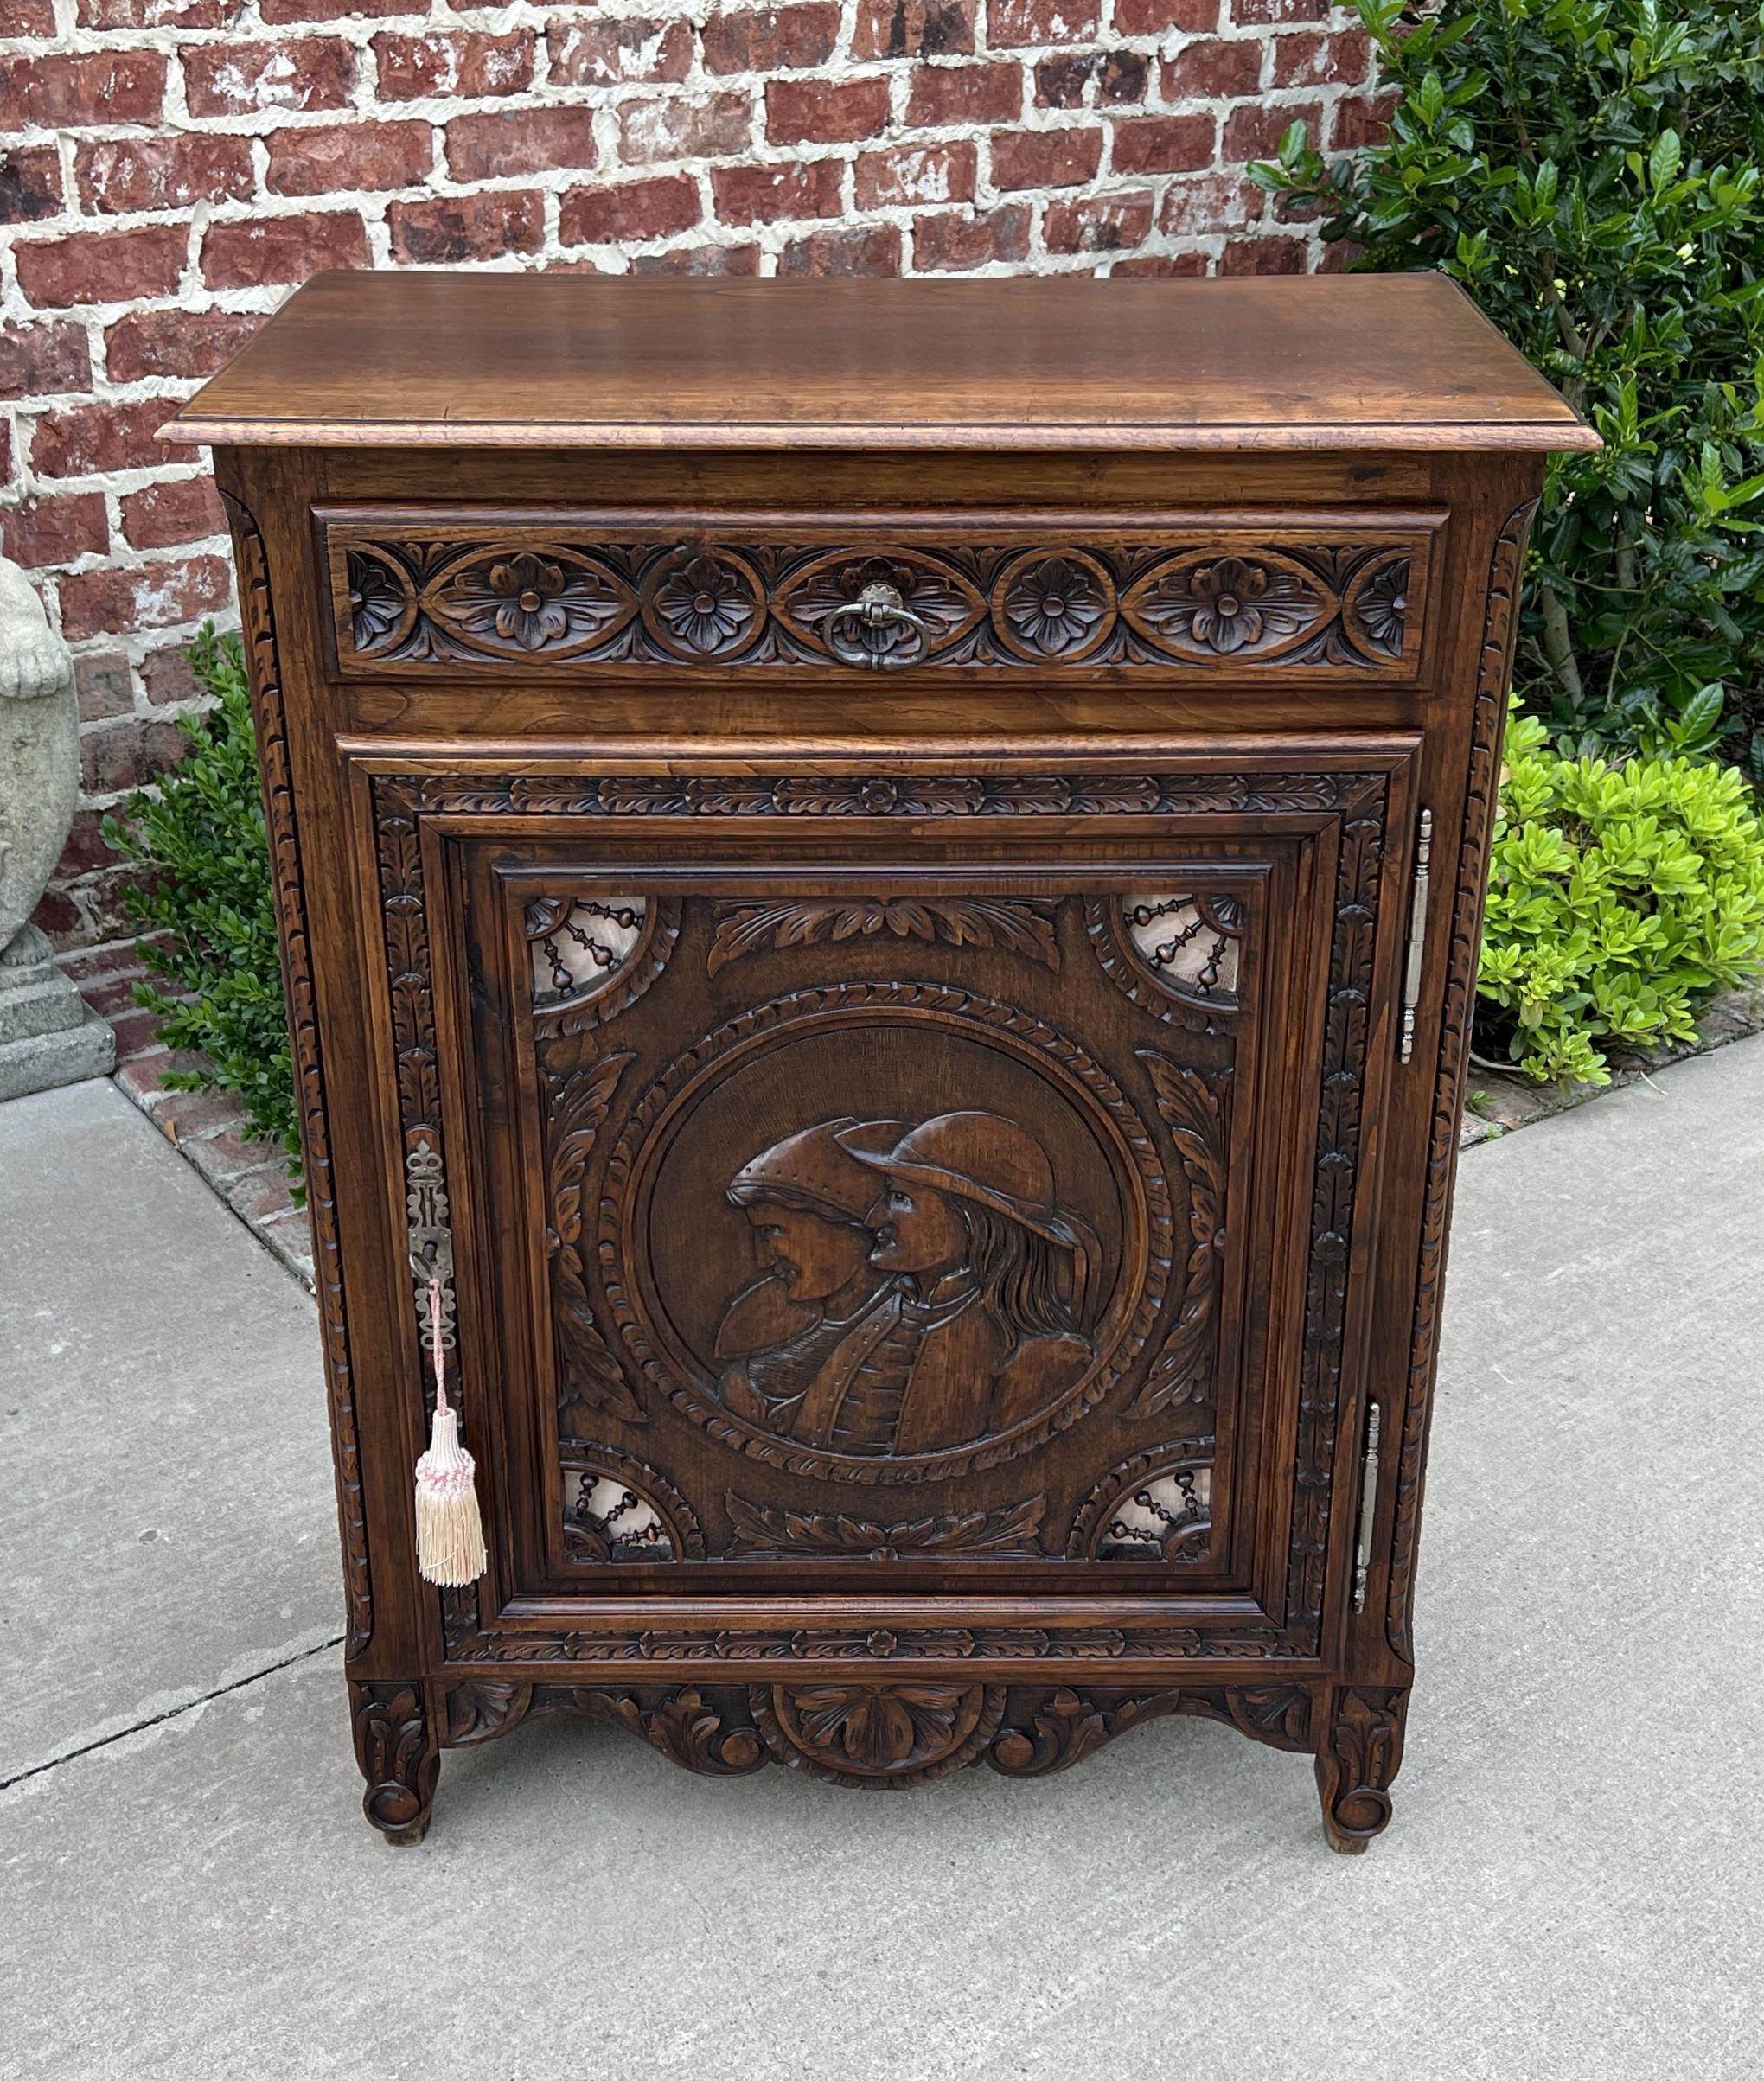 French Provincial Antique French Breton Jam Cabinet Cupboard Storage Drawer Carved Oak 19th C For Sale